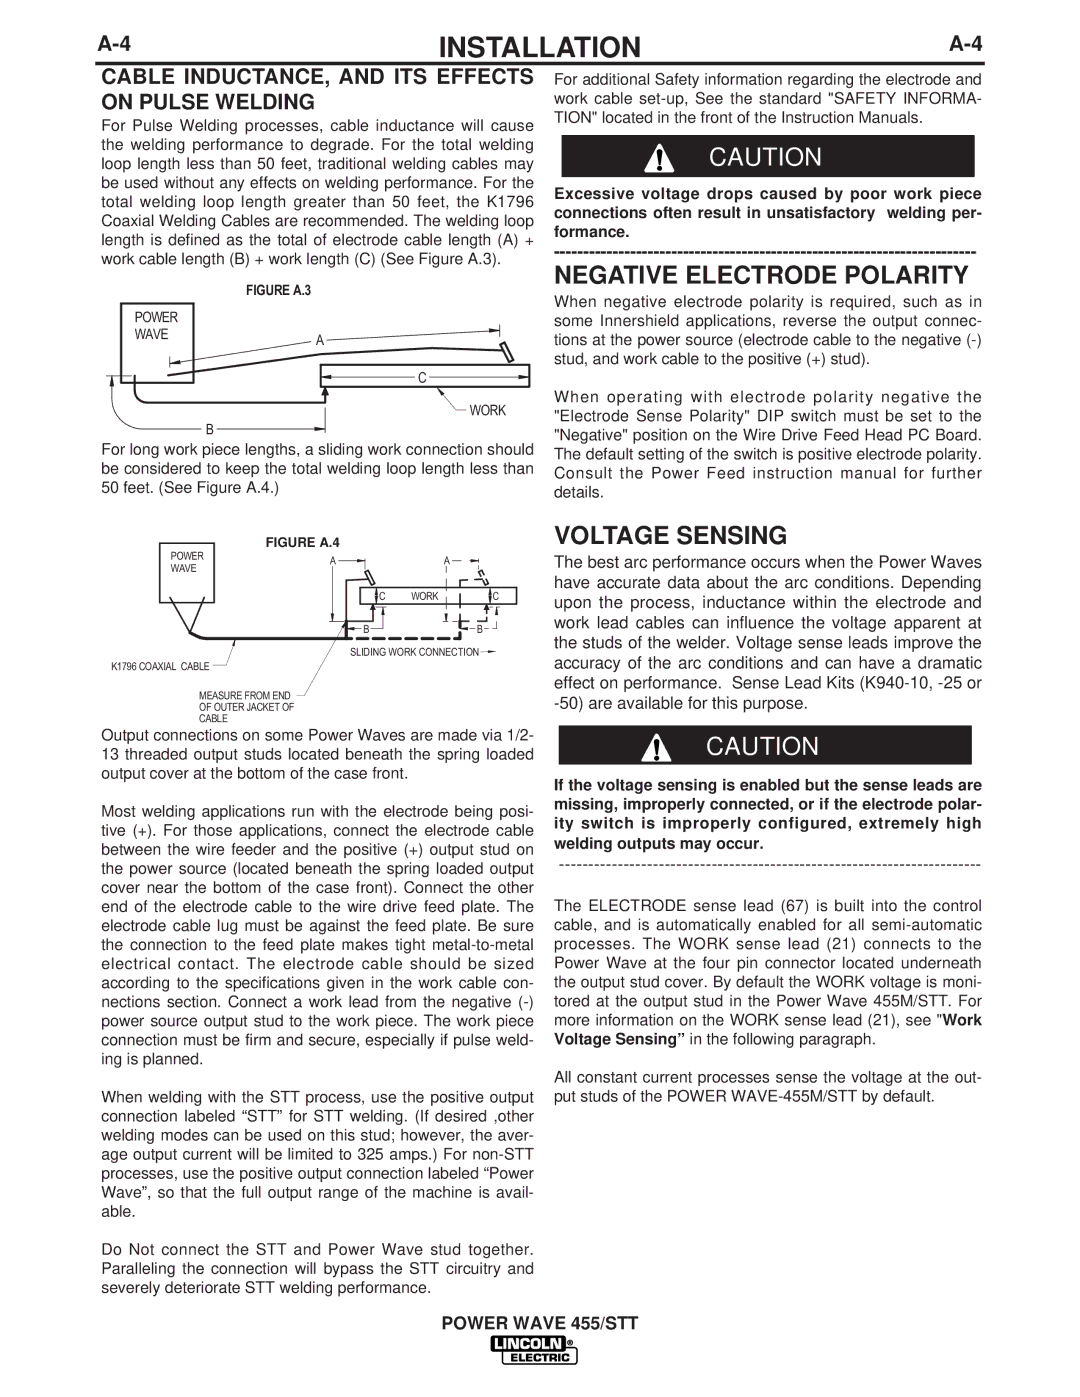 Lincoln Electric IM716 Negative Electrode Polarity, Voltage Sensing, Cable INDUCTANCE, and ITS Effects on Pulse Welding 